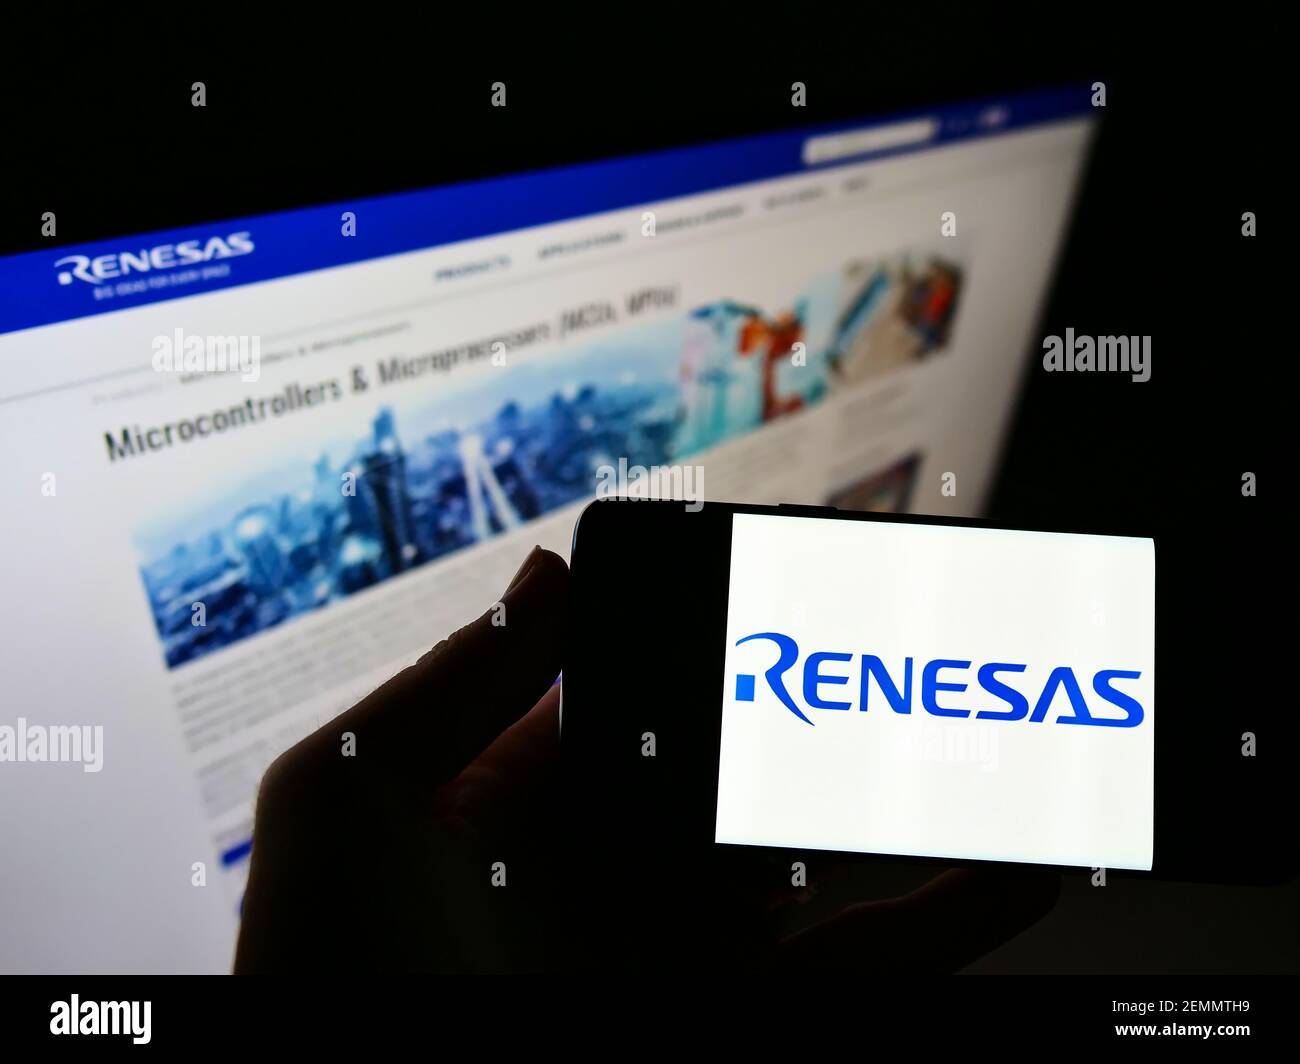 Person holding mobile phone with logo of Japanese company Renesas Electronics Corporation on screen in front of web page. Focus on cellphone display. Stock Photo